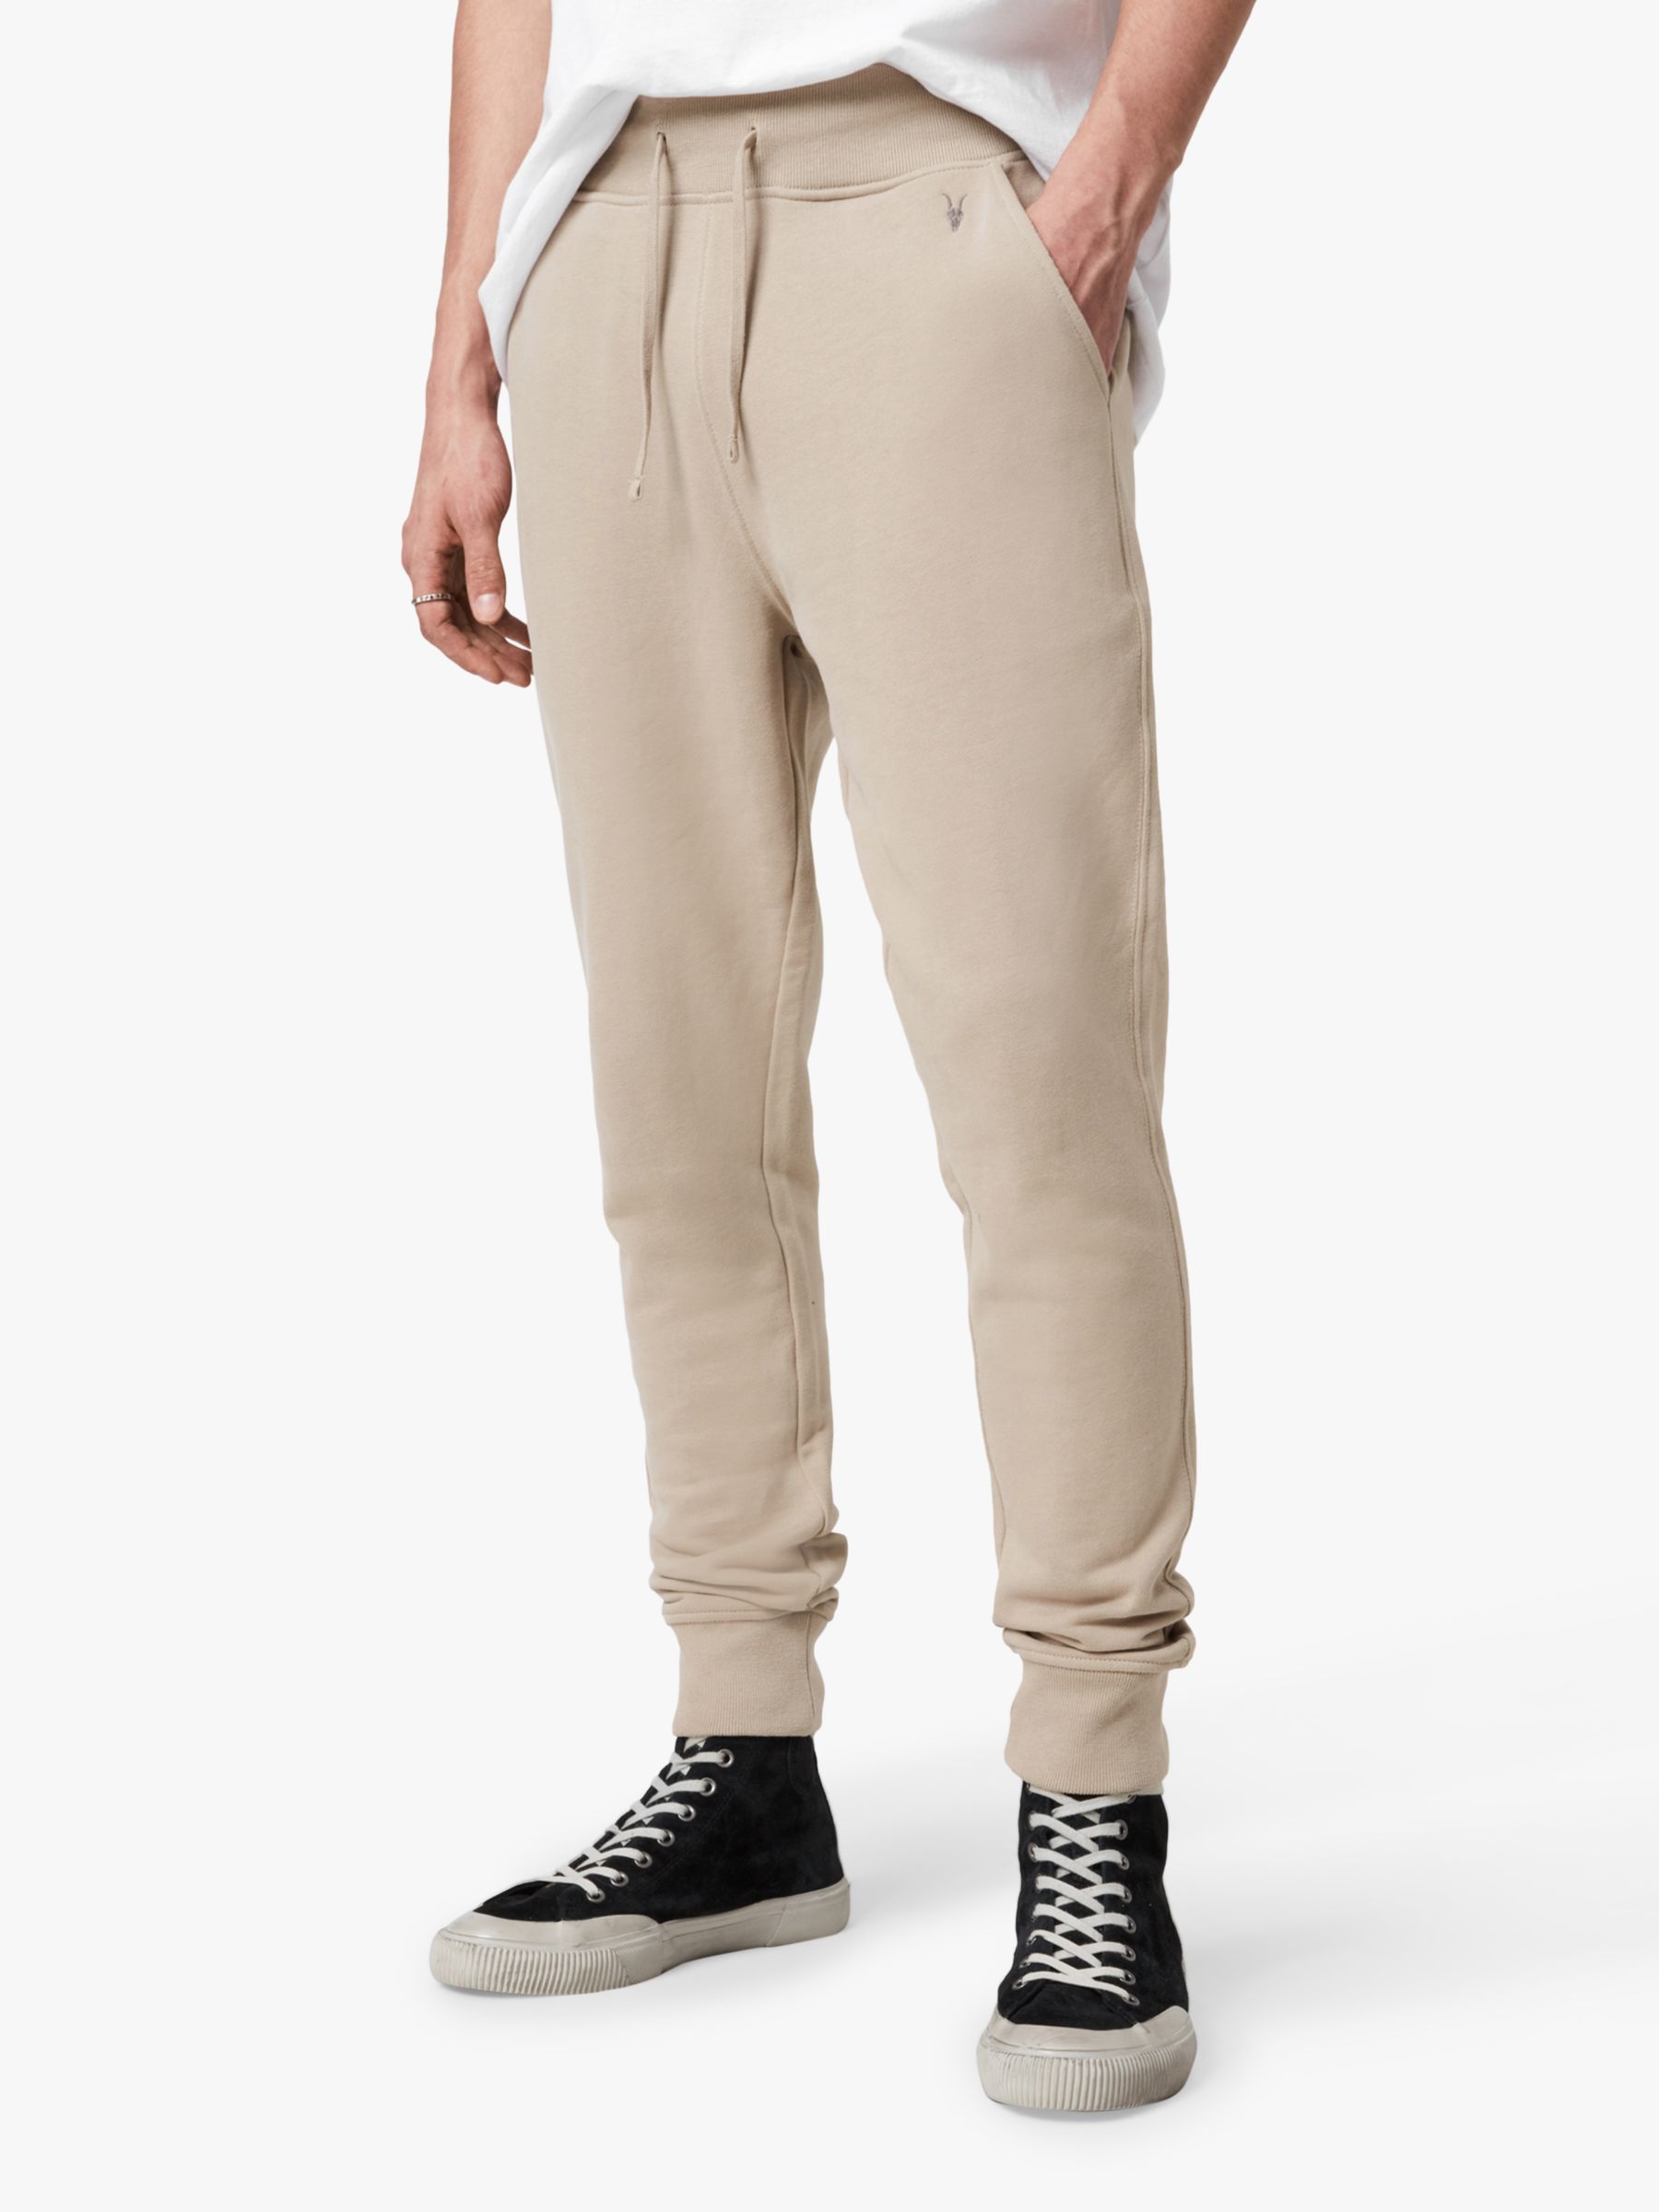 AllSaints Raven Sweat Pants, Toasted Taupe